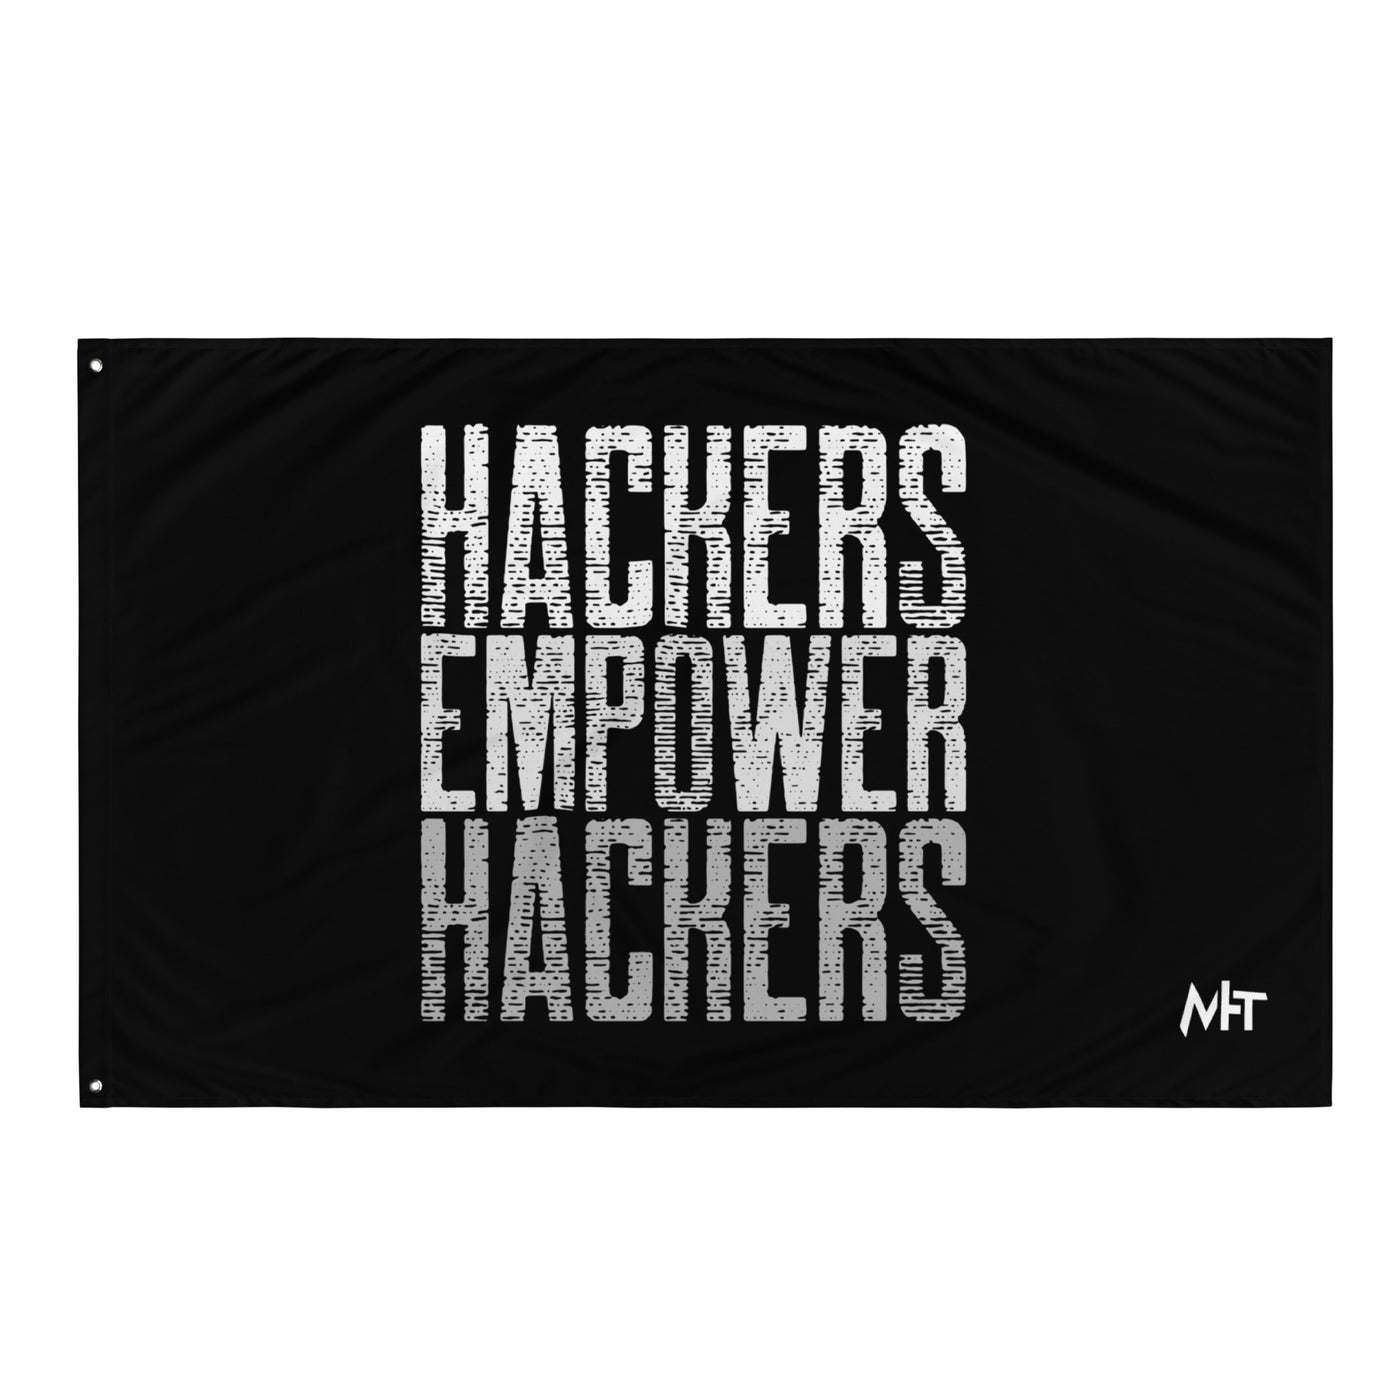 Hackers Empower Hackers V1 - Flag